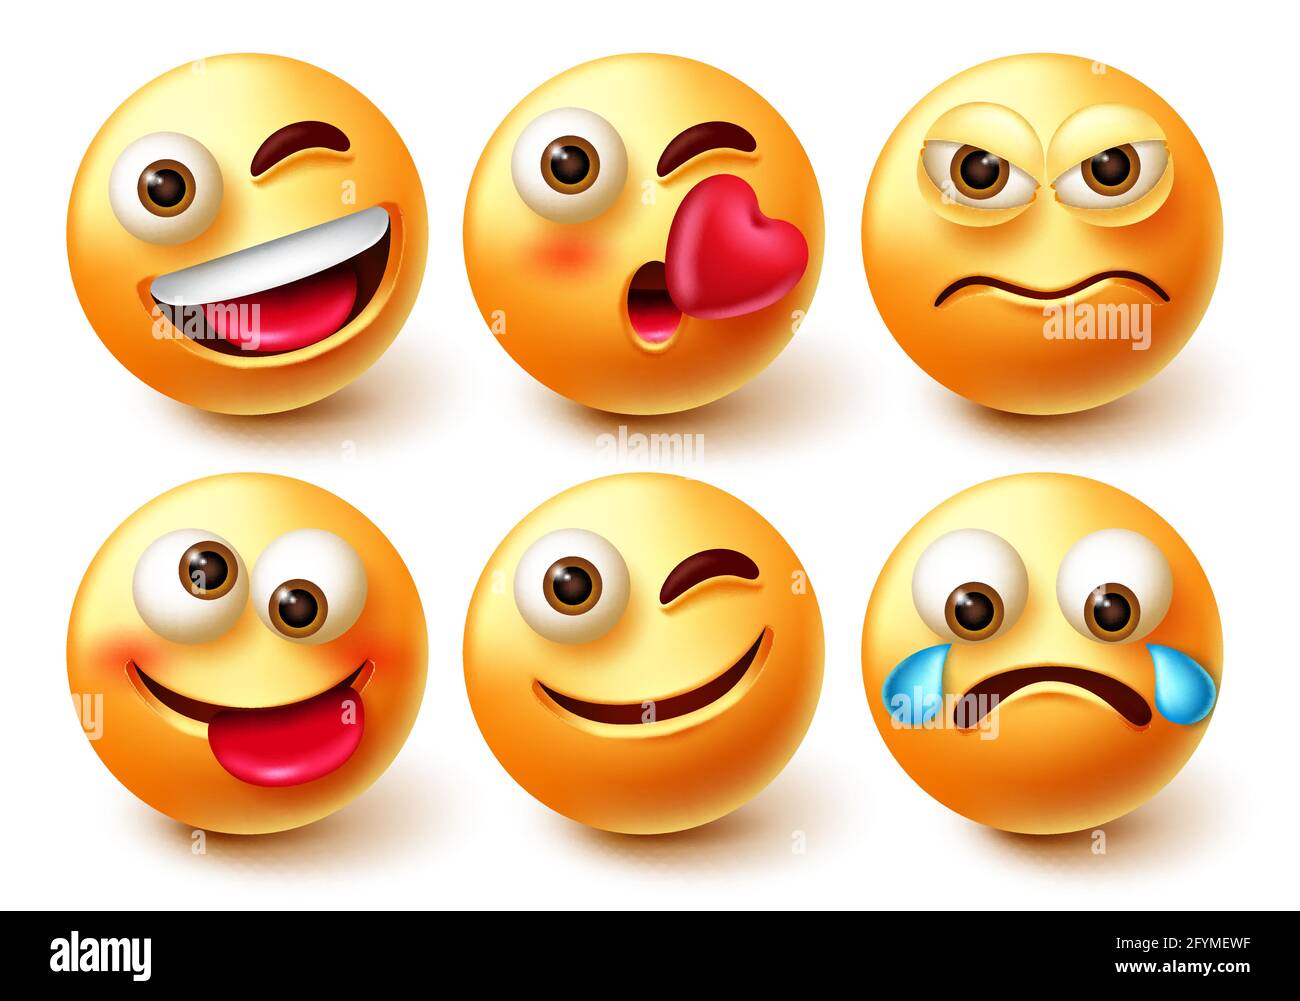 Emoticon smiley vector character set. Emoji smileys 3d characters with facial expressions happy, angry, crying and winking isolated. Stock Vector